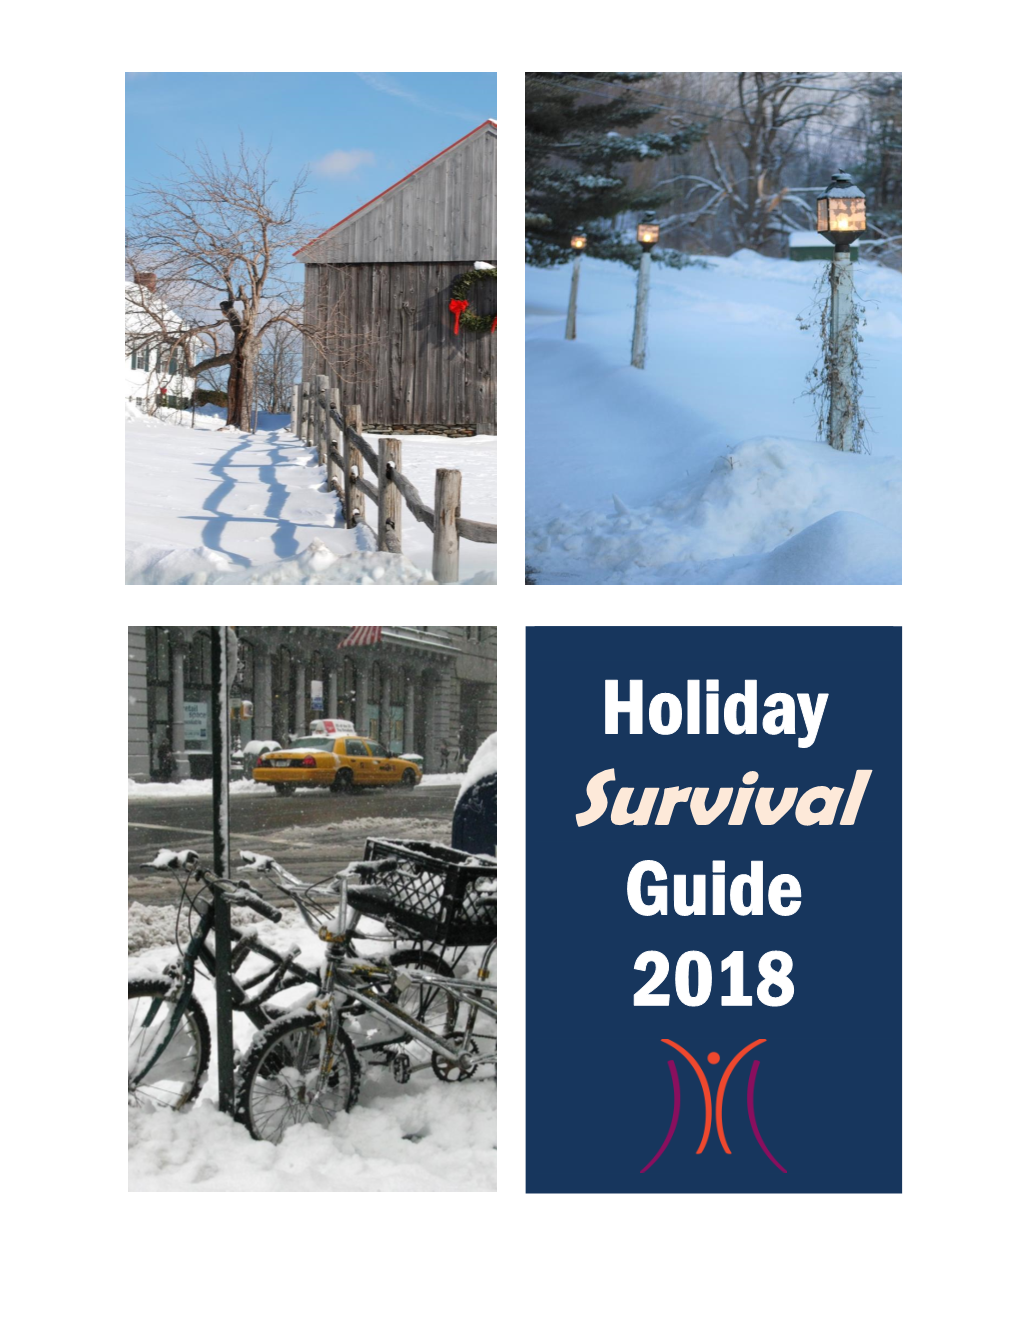 Holiday Survival Guide 2018